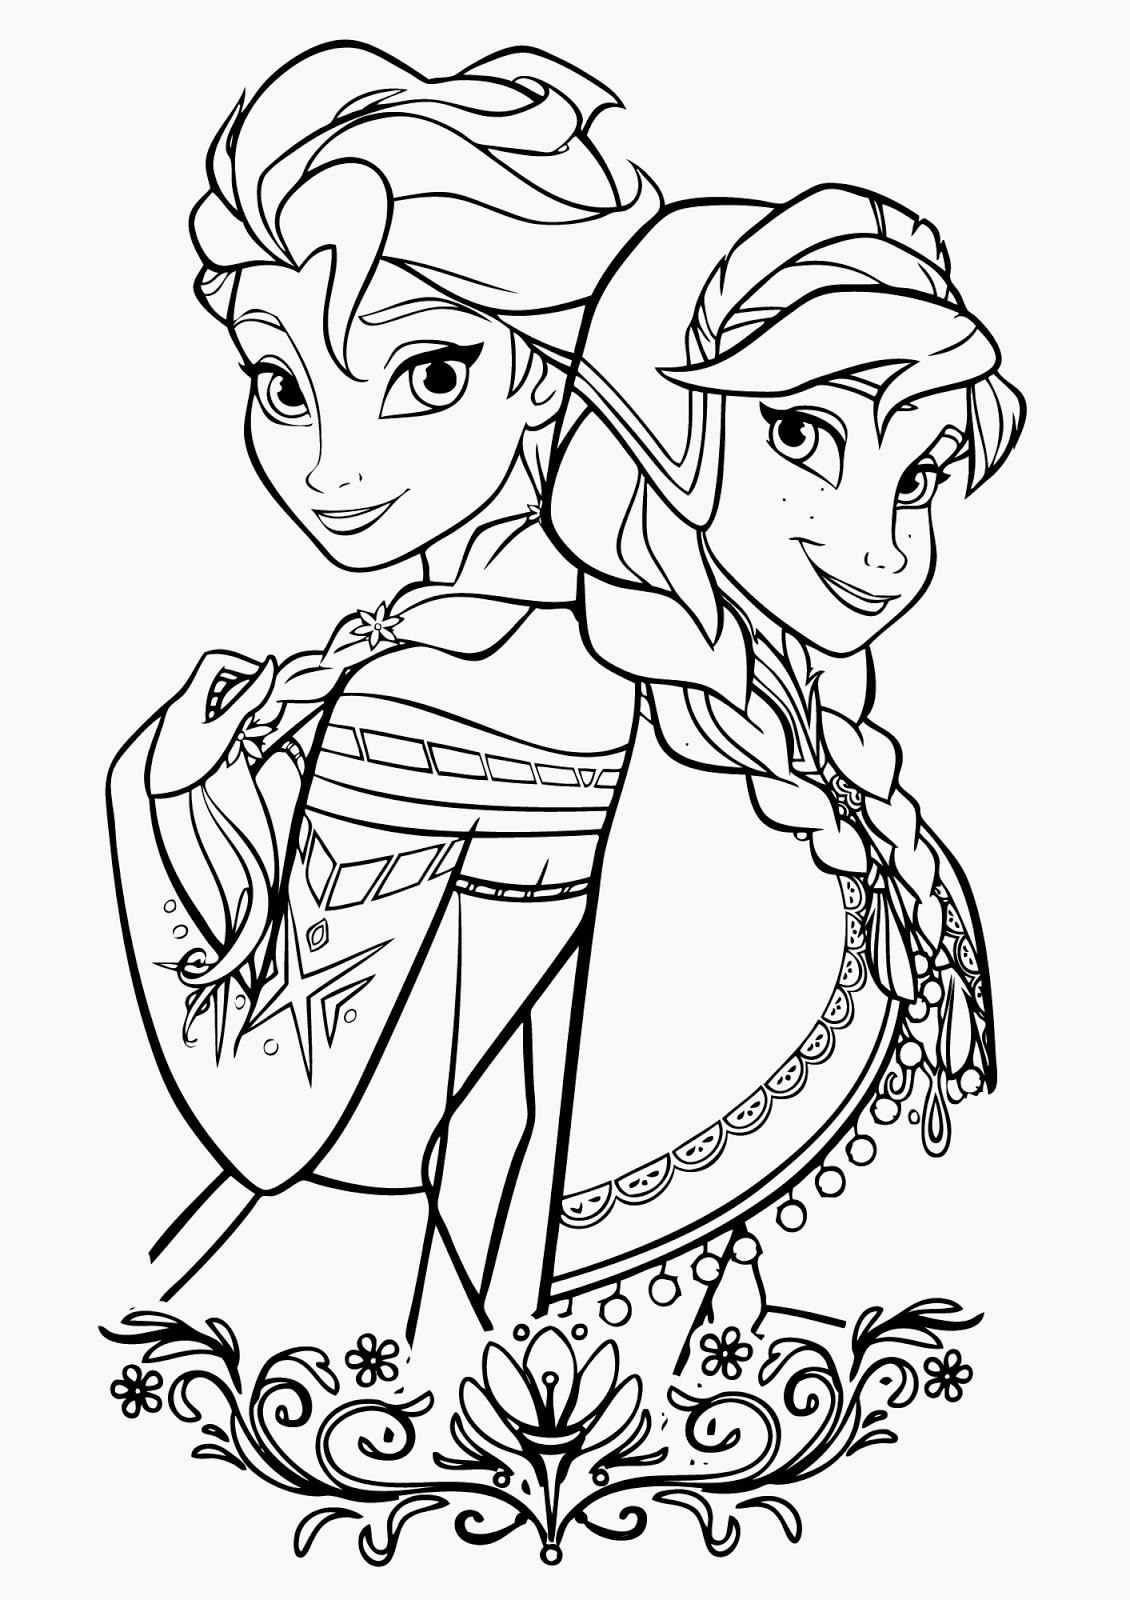 Frozen Coloring Pages Free Printable
 15 Beautiful Disney Frozen Coloring Pages Free Instant